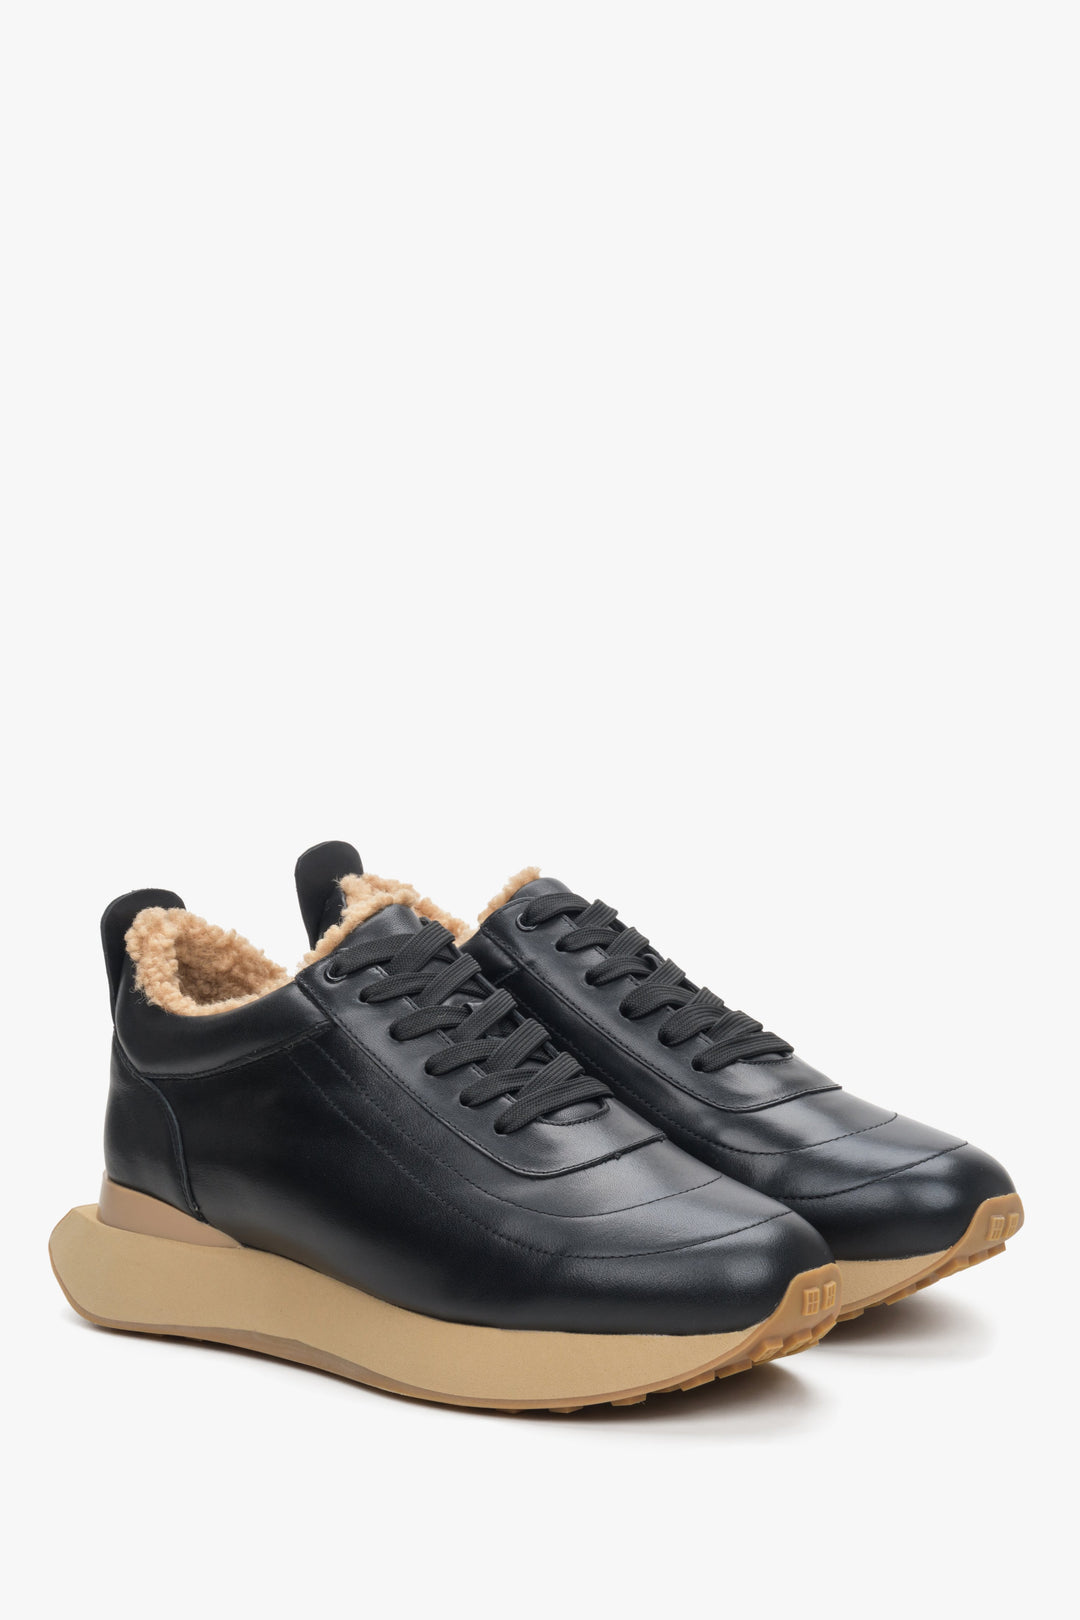 Women's black & beige sneakers made of genuine leather with fur for winter by Estro.